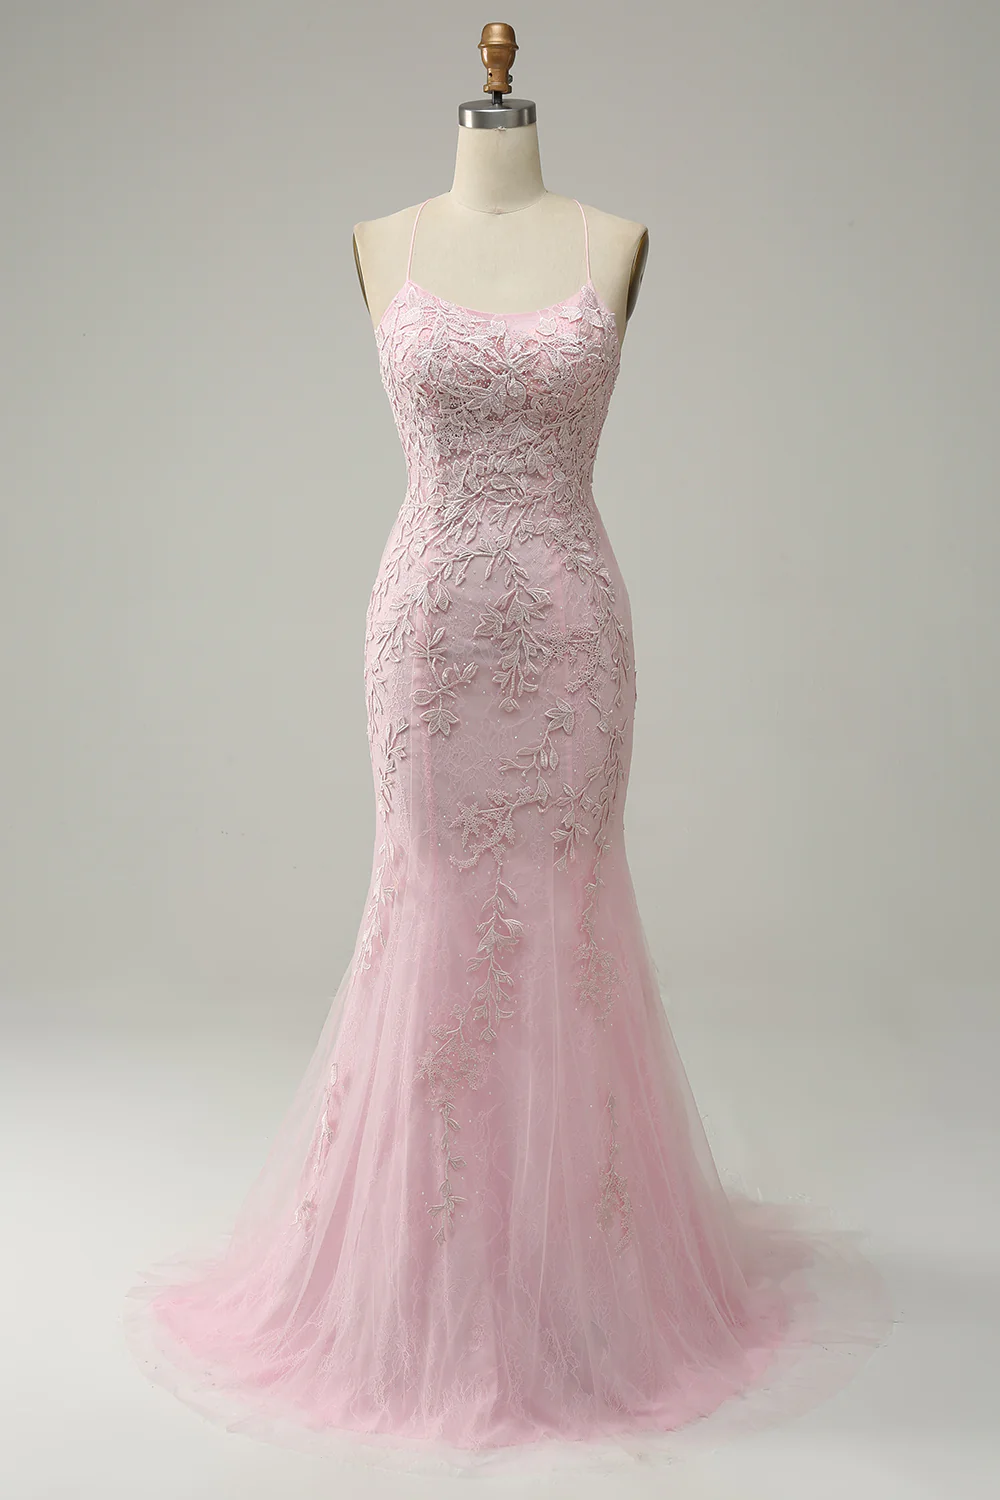 Mermaid Spaghetti Straps Light Pink Long Prom Dress with Appliques Y2316